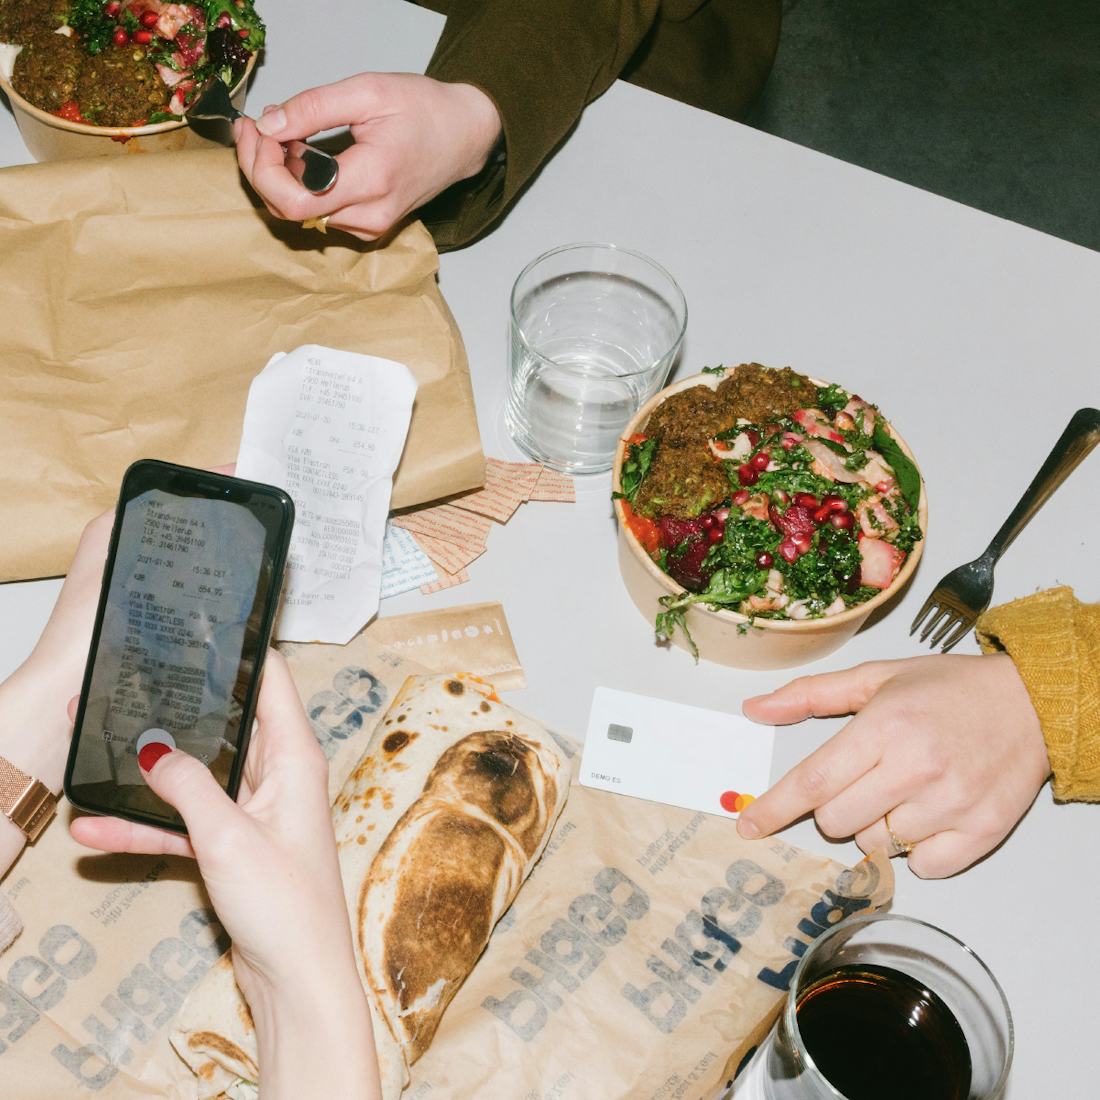 A group of people using Pleo's receipt software to record their dinner expenses